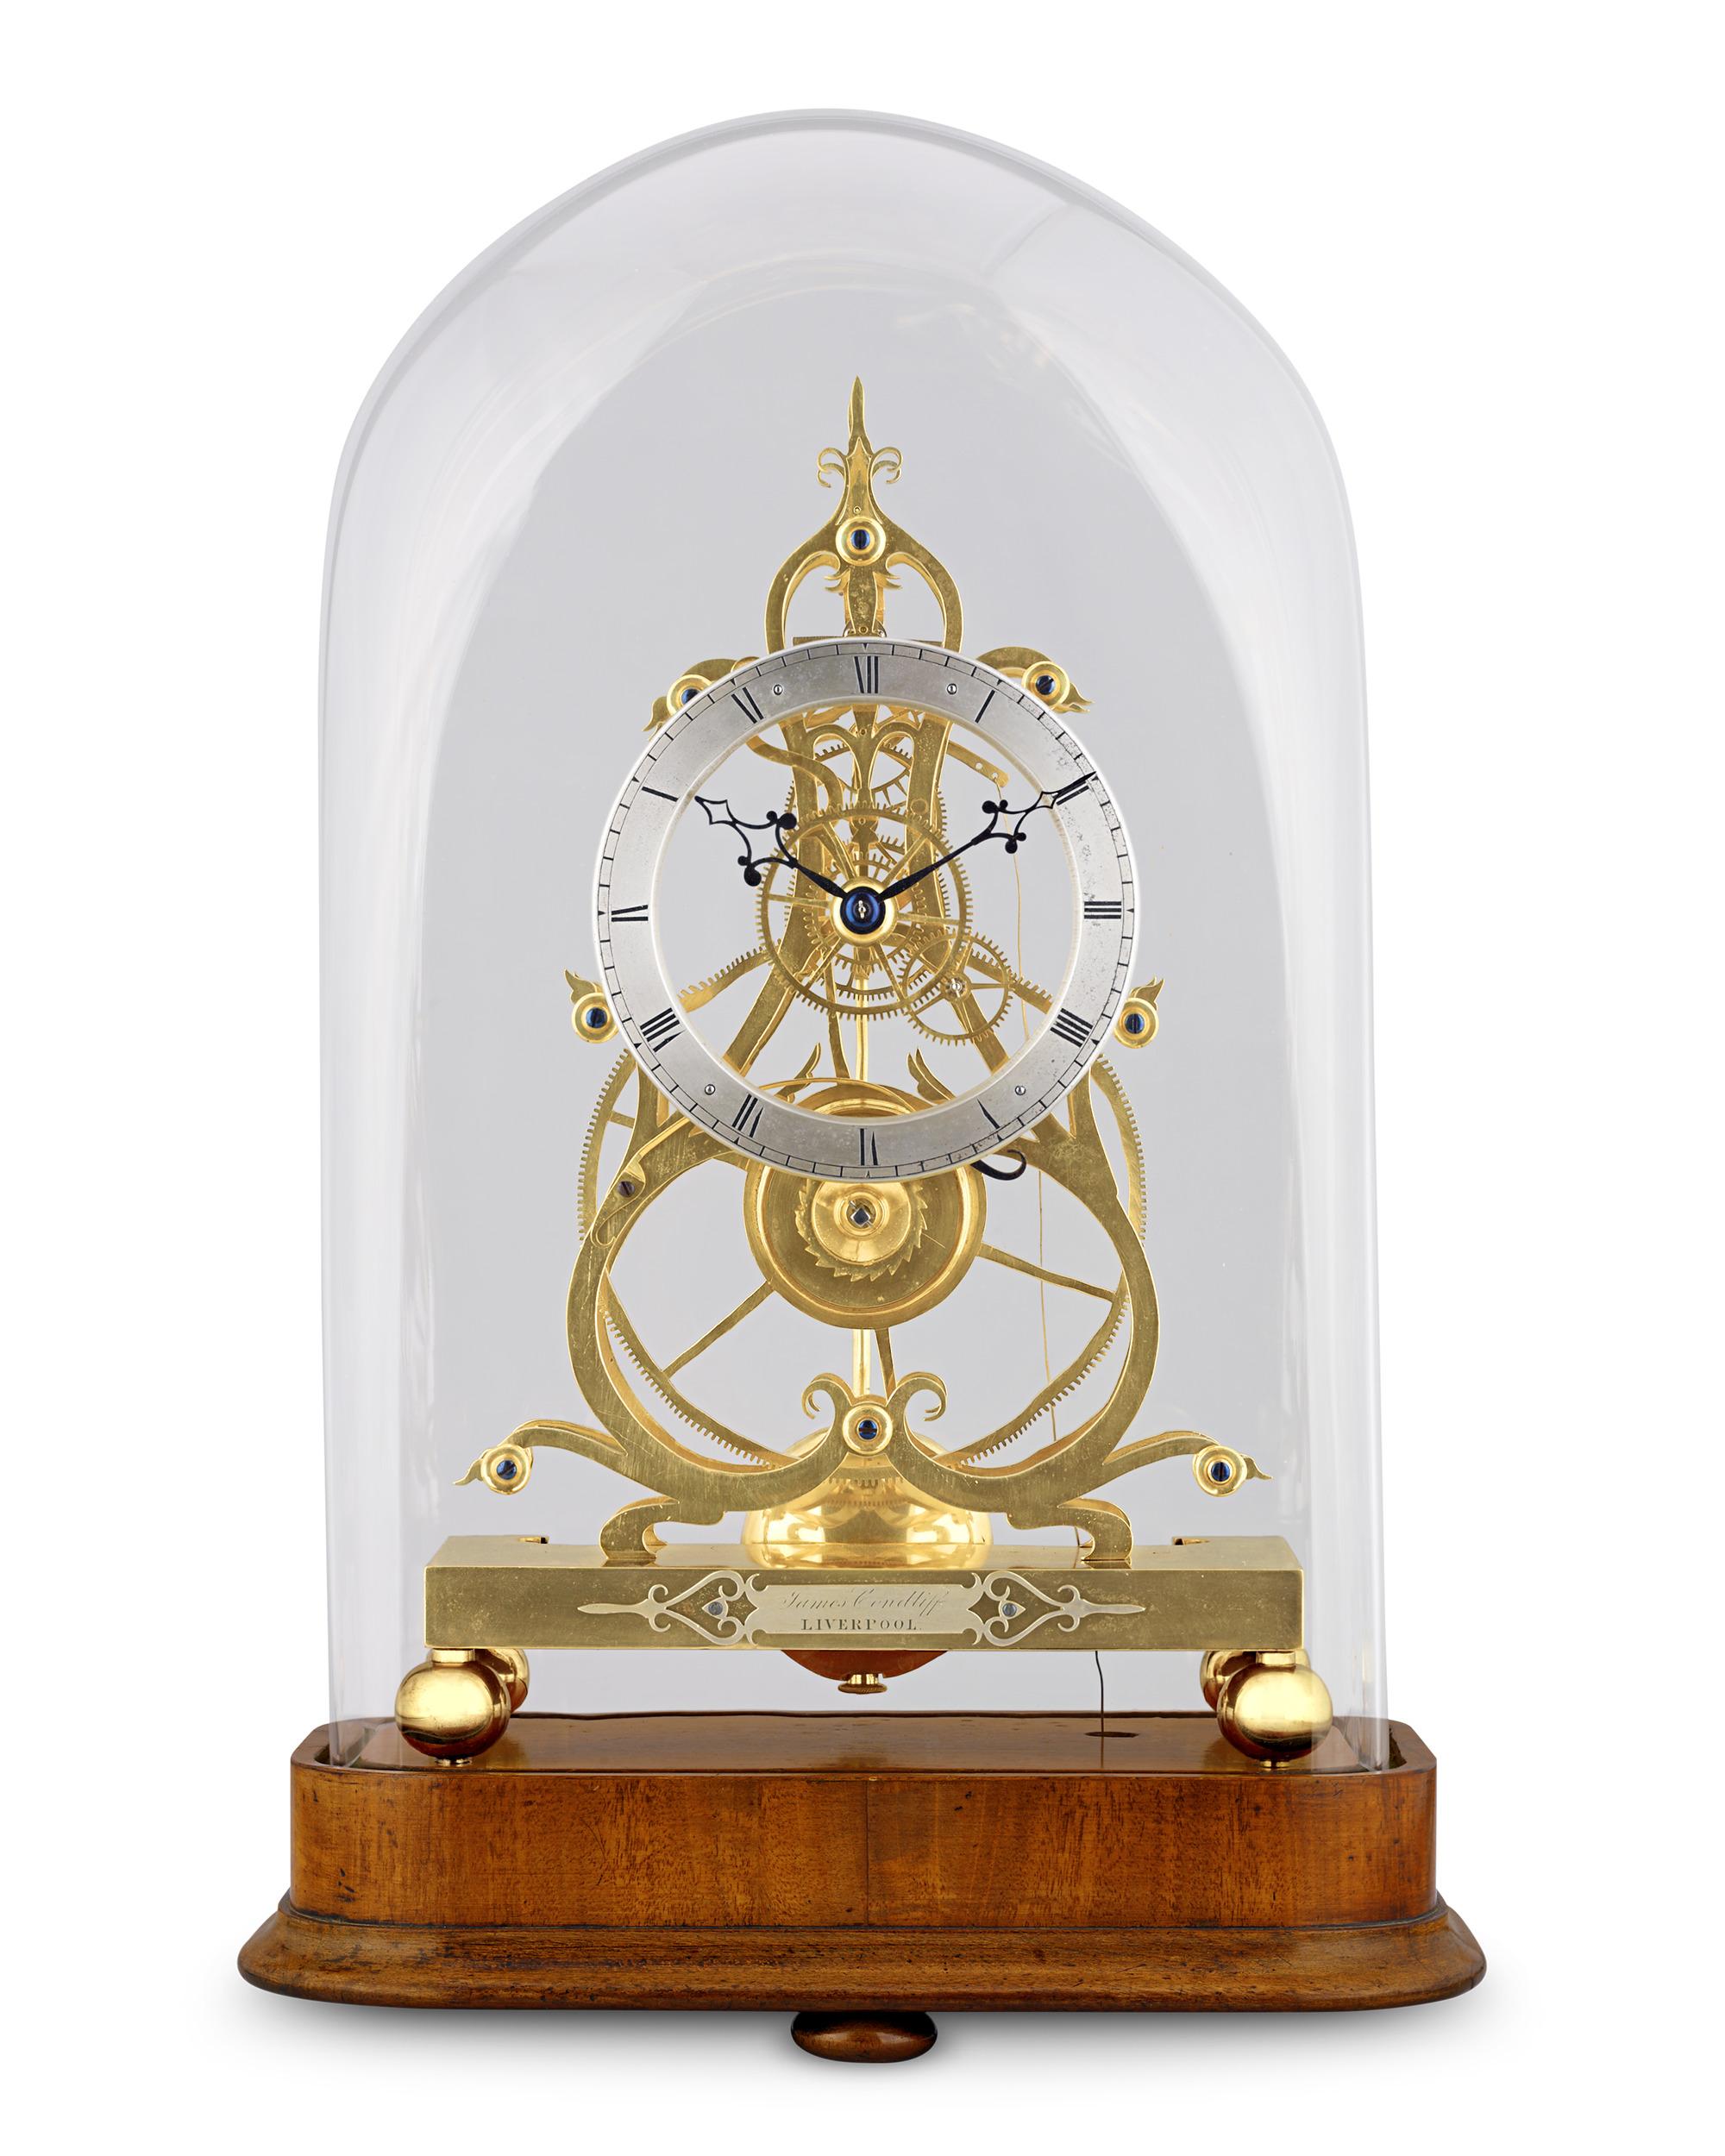 This exceptional timepiece is a Victorian-era skeleton clock crafted by James Condliff of Liverpool, a luminary in the realm of 19th-century British horology. Condliff was distinguished for his pioneering role in the development of English skeleton